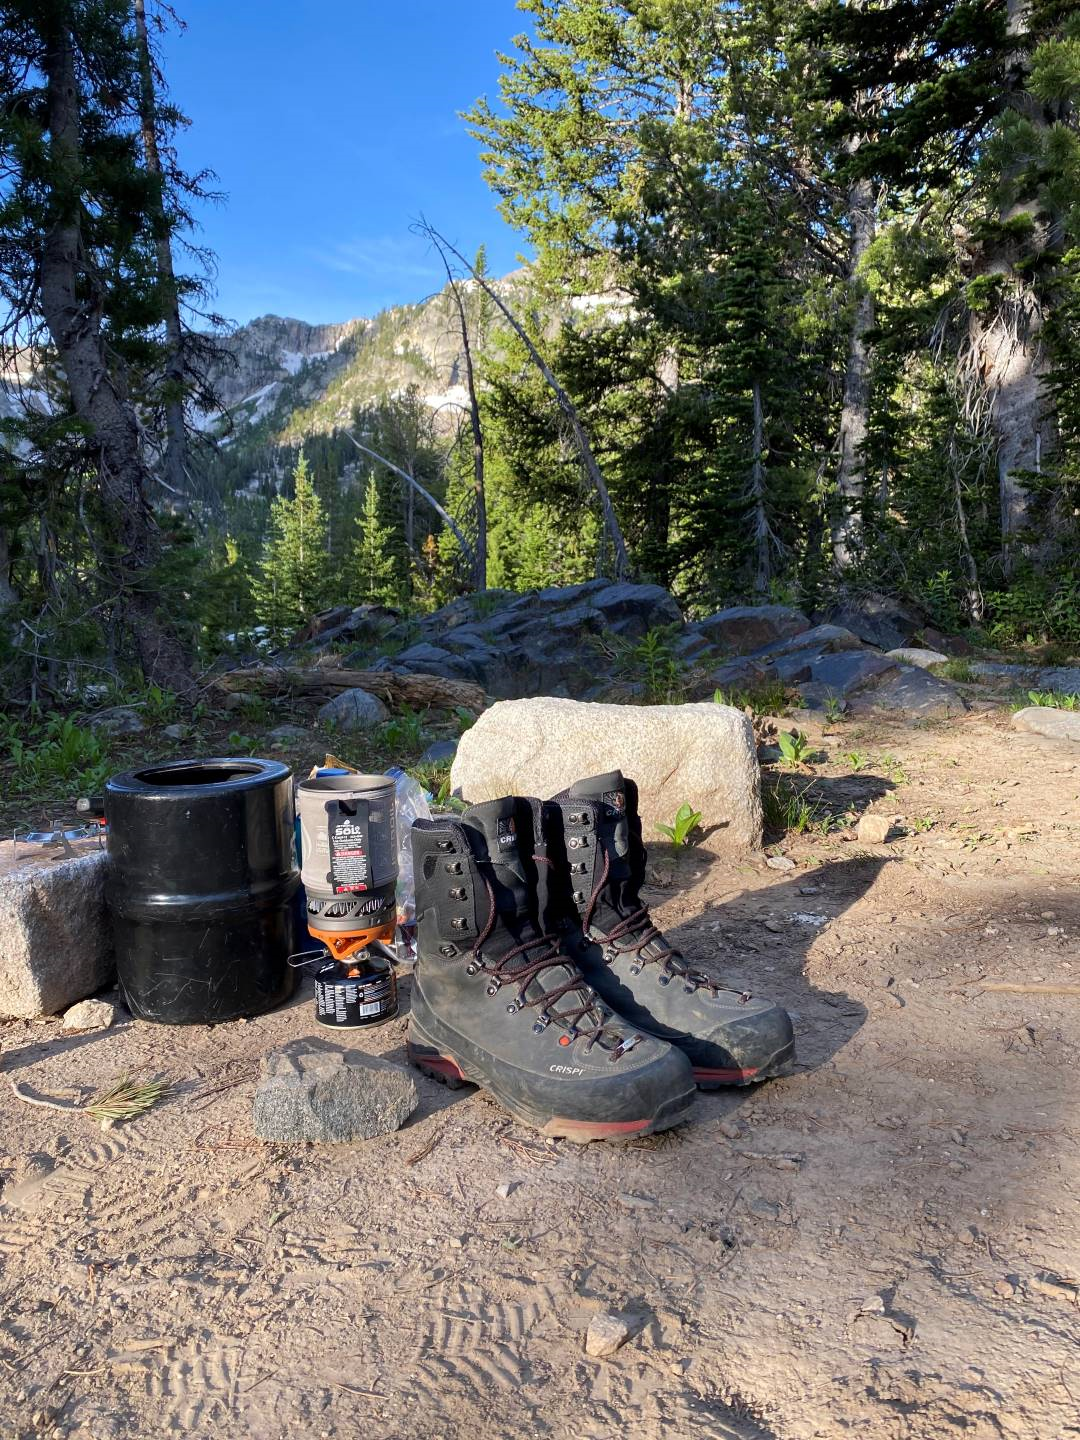 Crispi Briksdal SF Pro hunting boots in the field